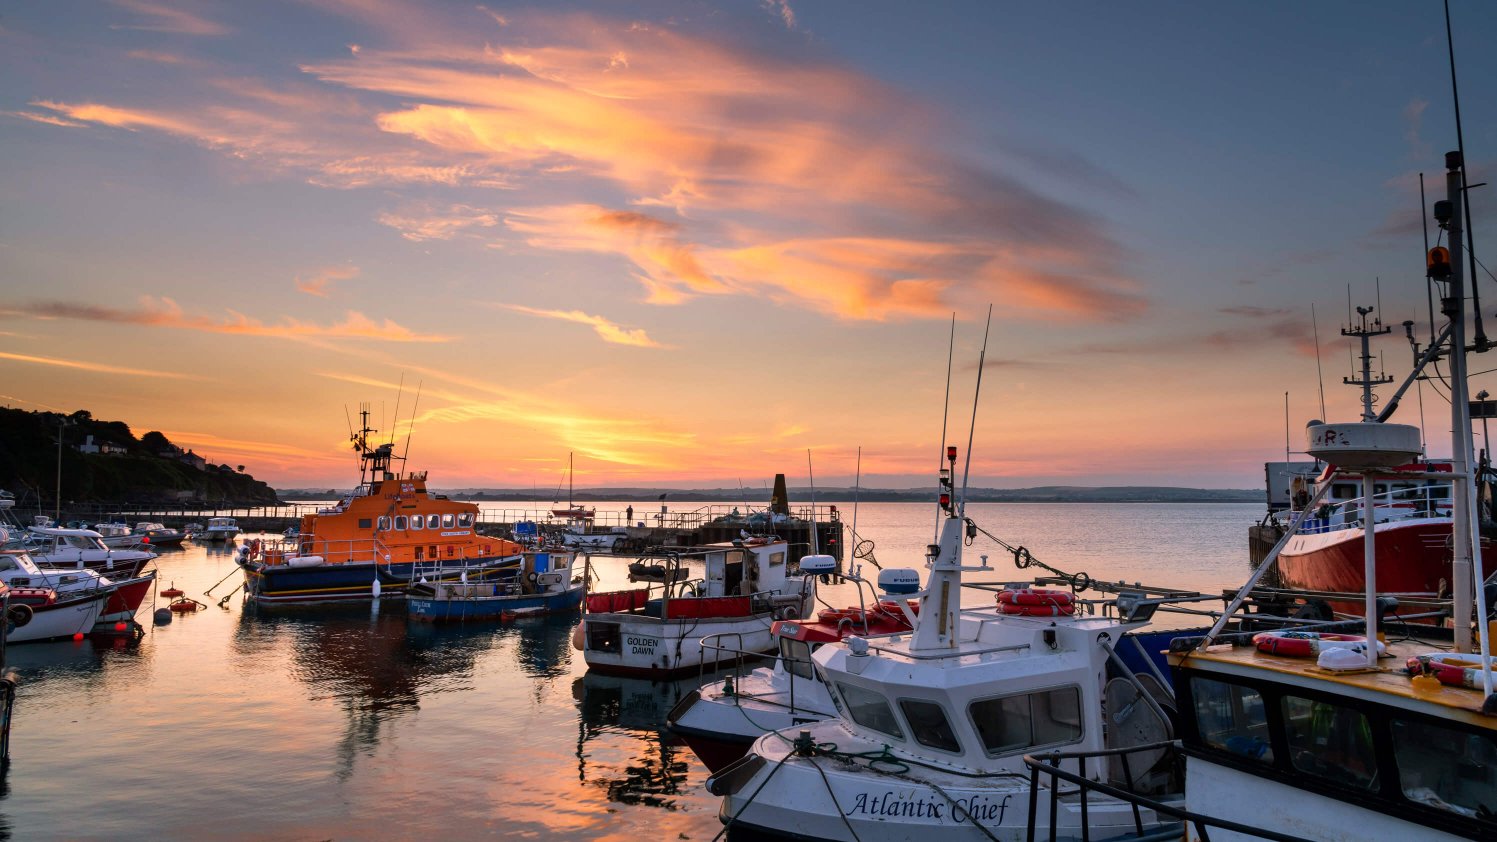 Ballycotton harbour at sunset with boats in the foreground, including a lifeboat